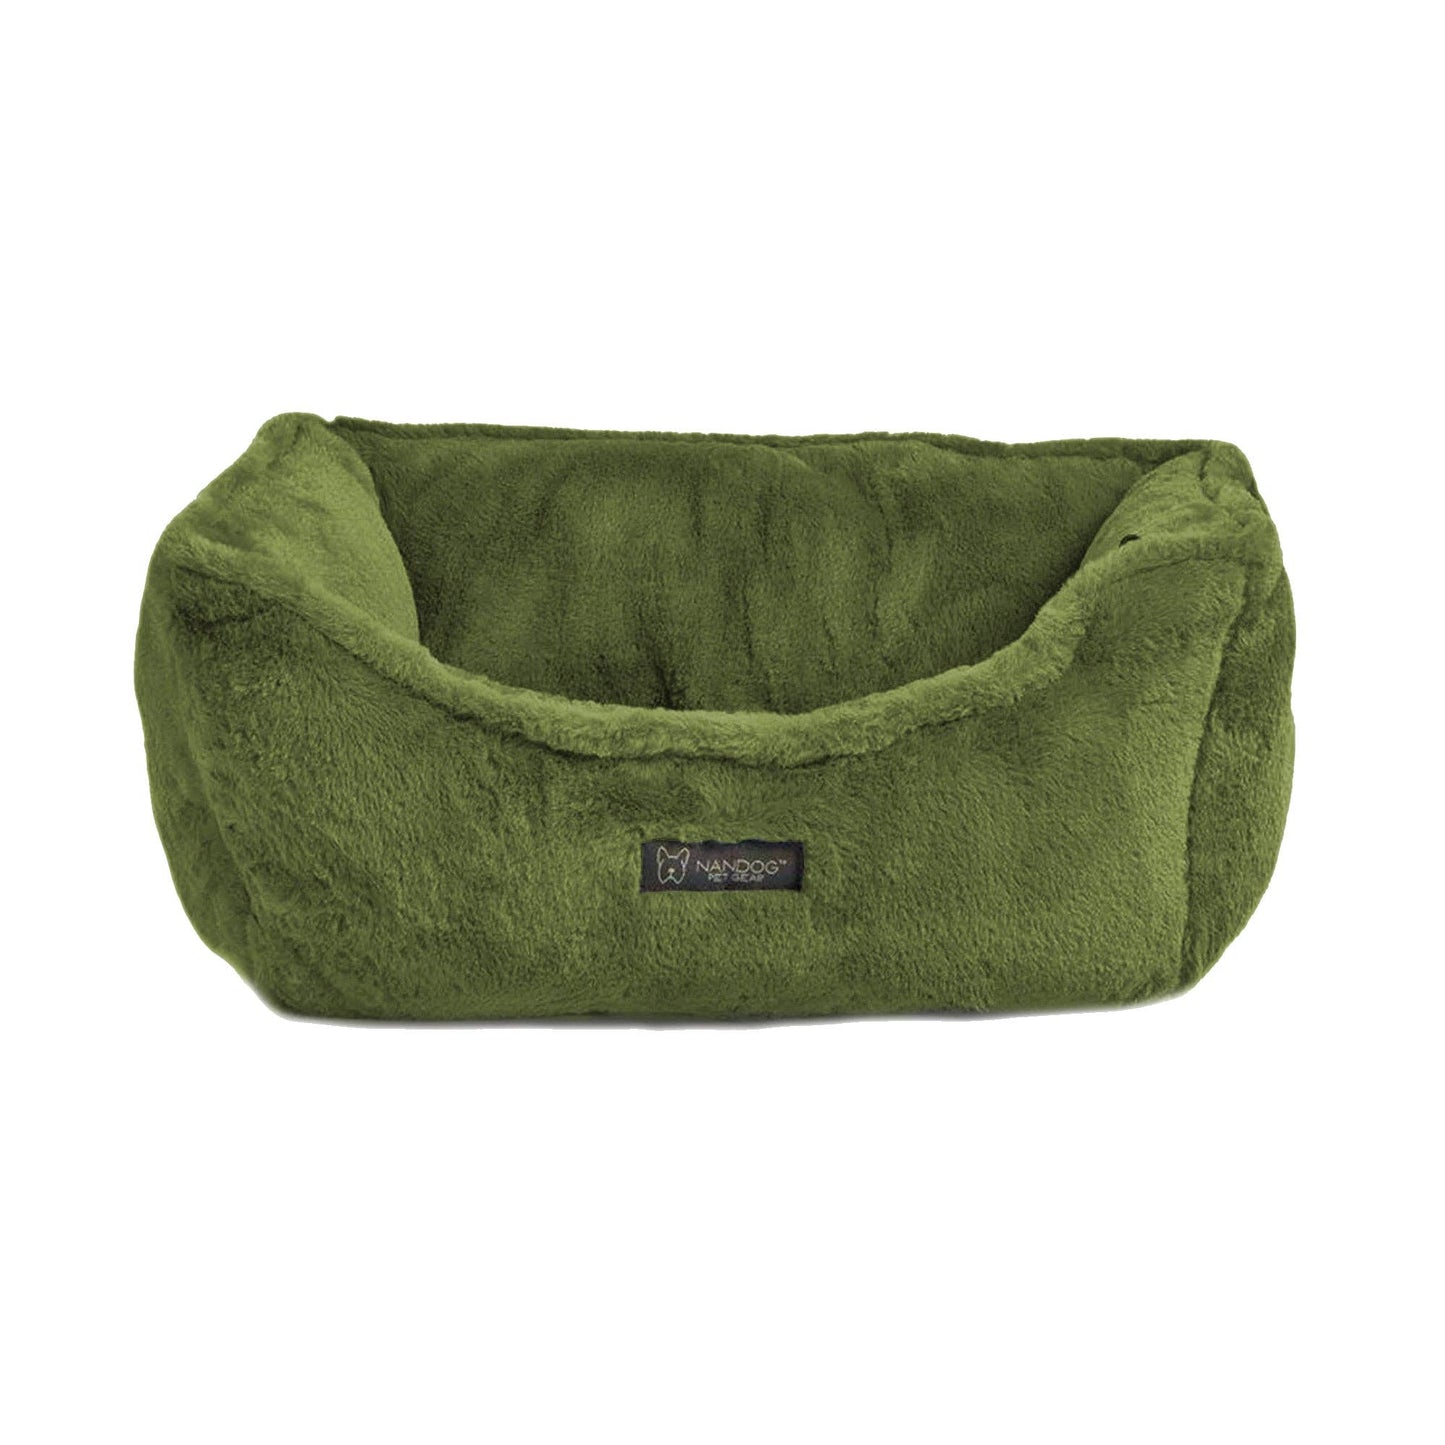 Load image into Gallery viewer, Nandog Cloud Reversible Beds Olive Green Image
